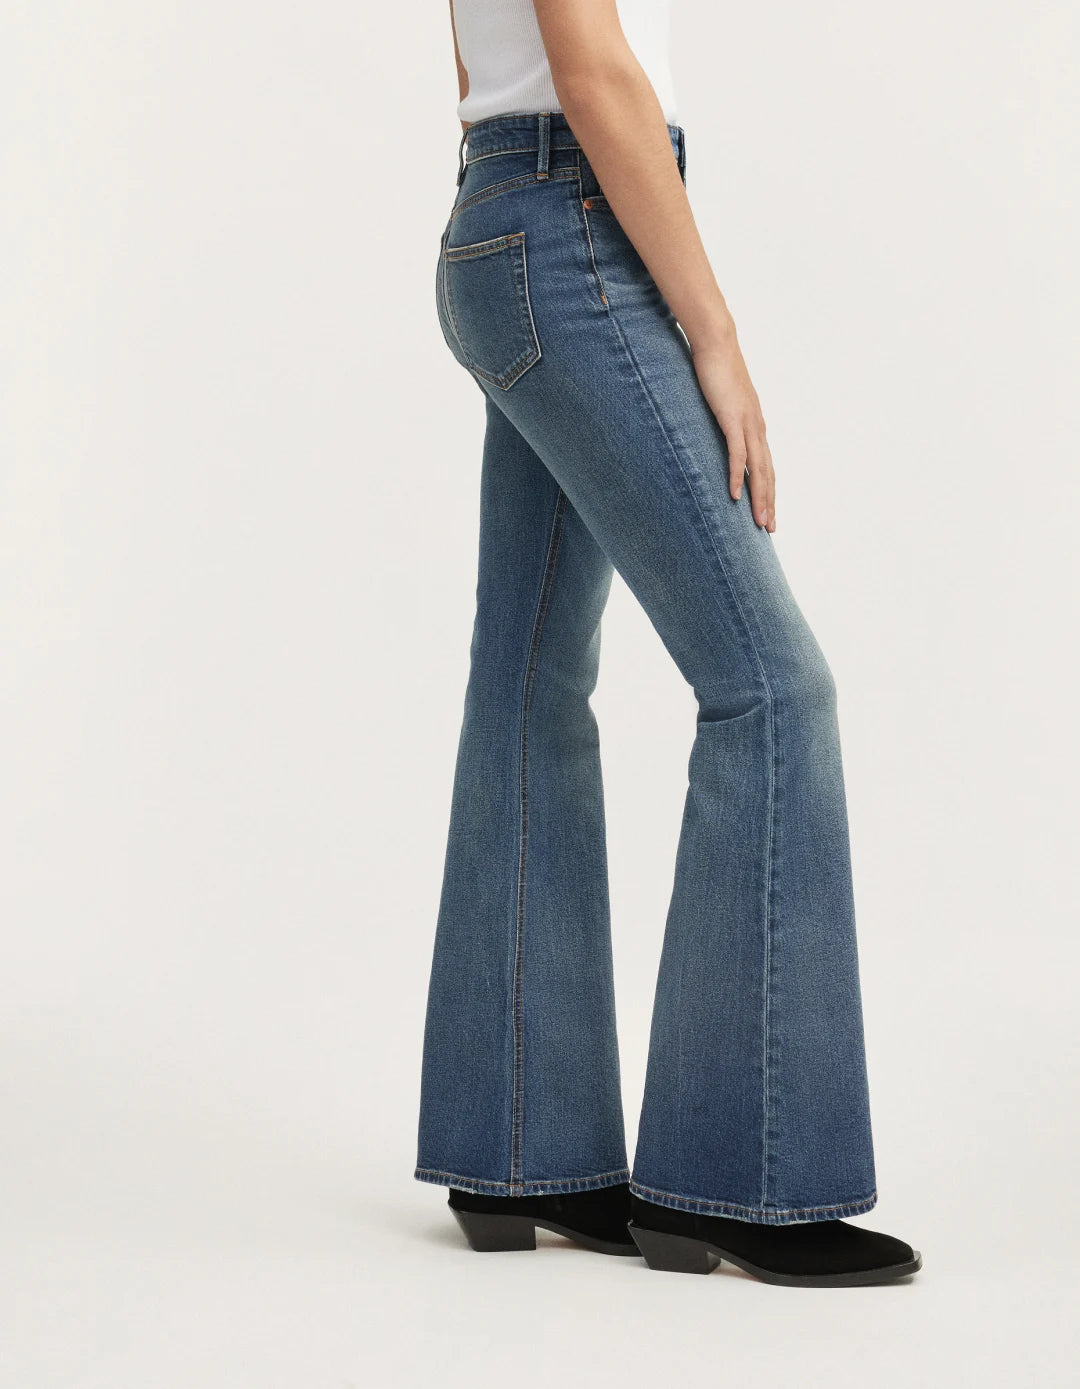 High rise flare jean in mid blue wash